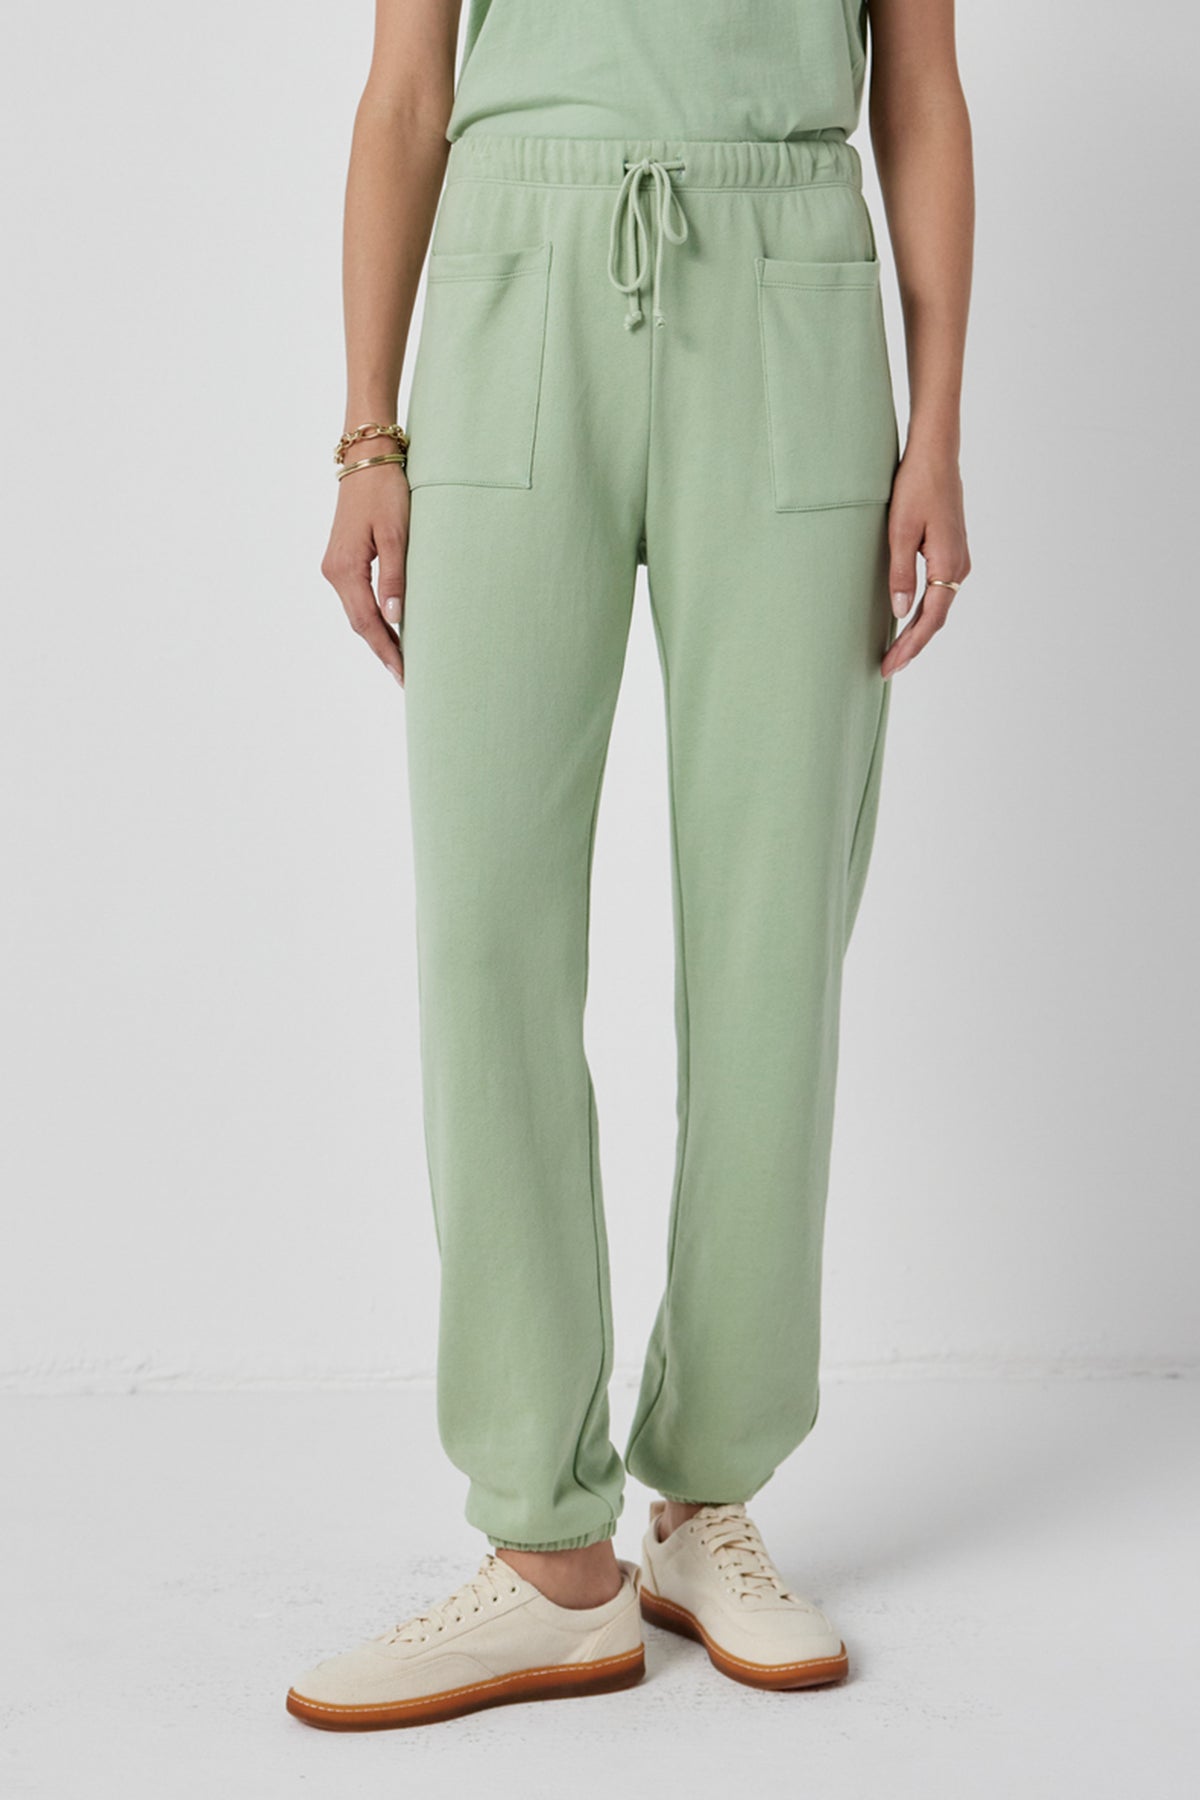 A woman wearing WESTLAKE SWEATPANTS by Velvet by Jenny Graham and a white tee.-36168747647169